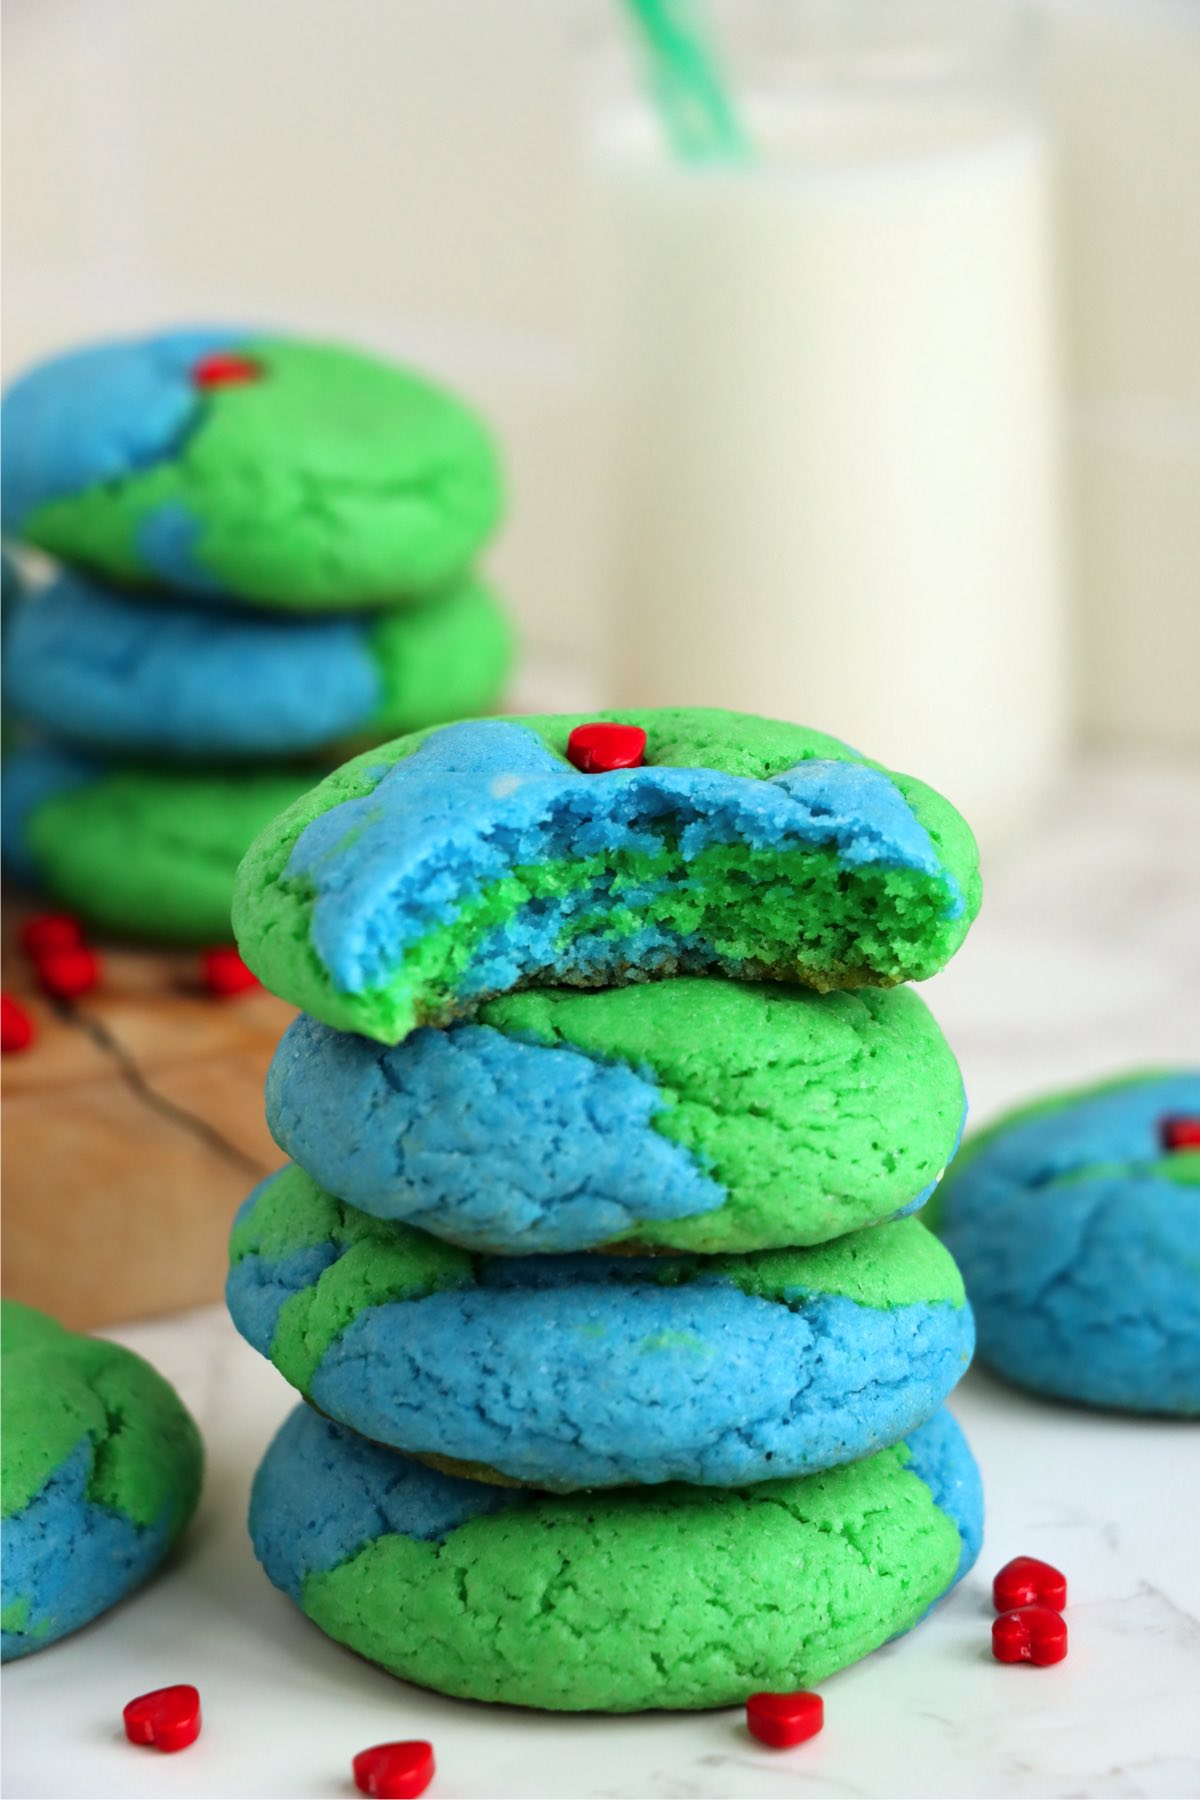 Stack of blue and green cookies with a bite taken out of the top one